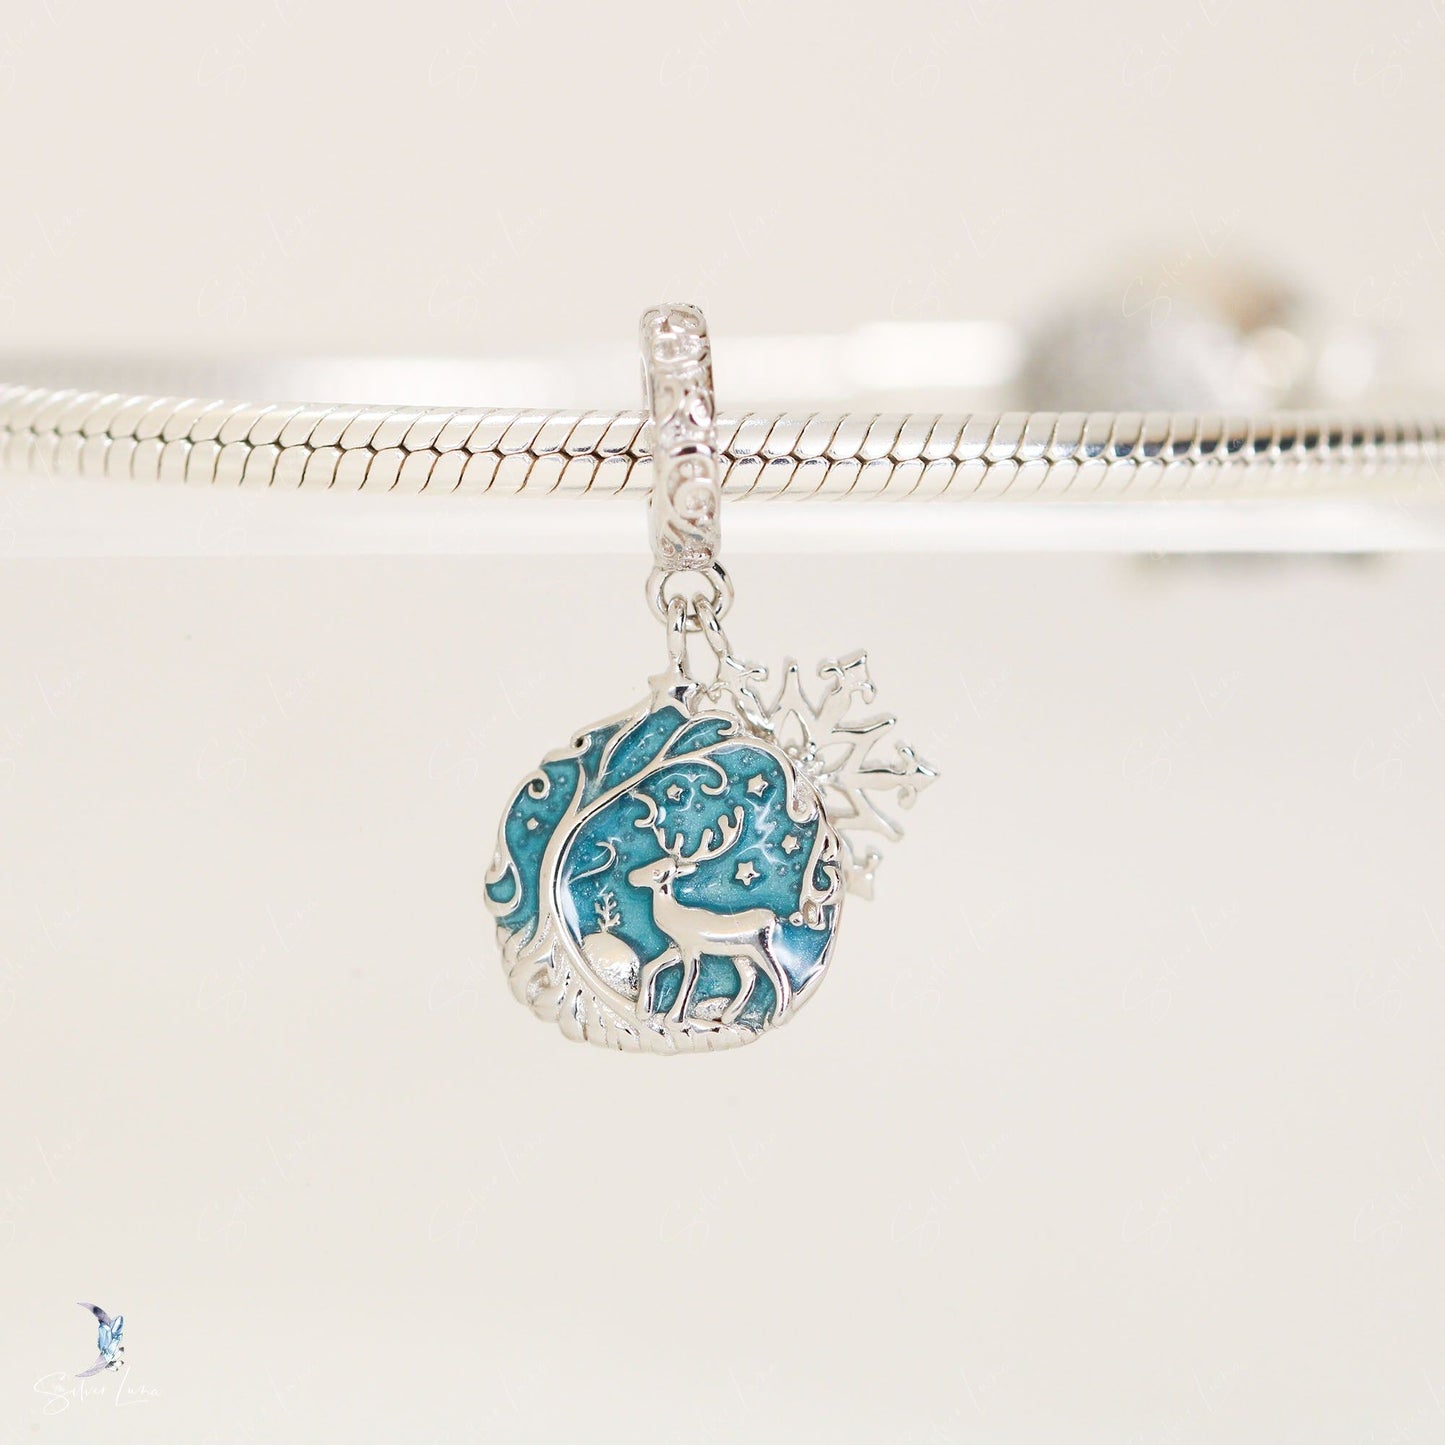 Deer in the snowy forest sterling silver pendant charm